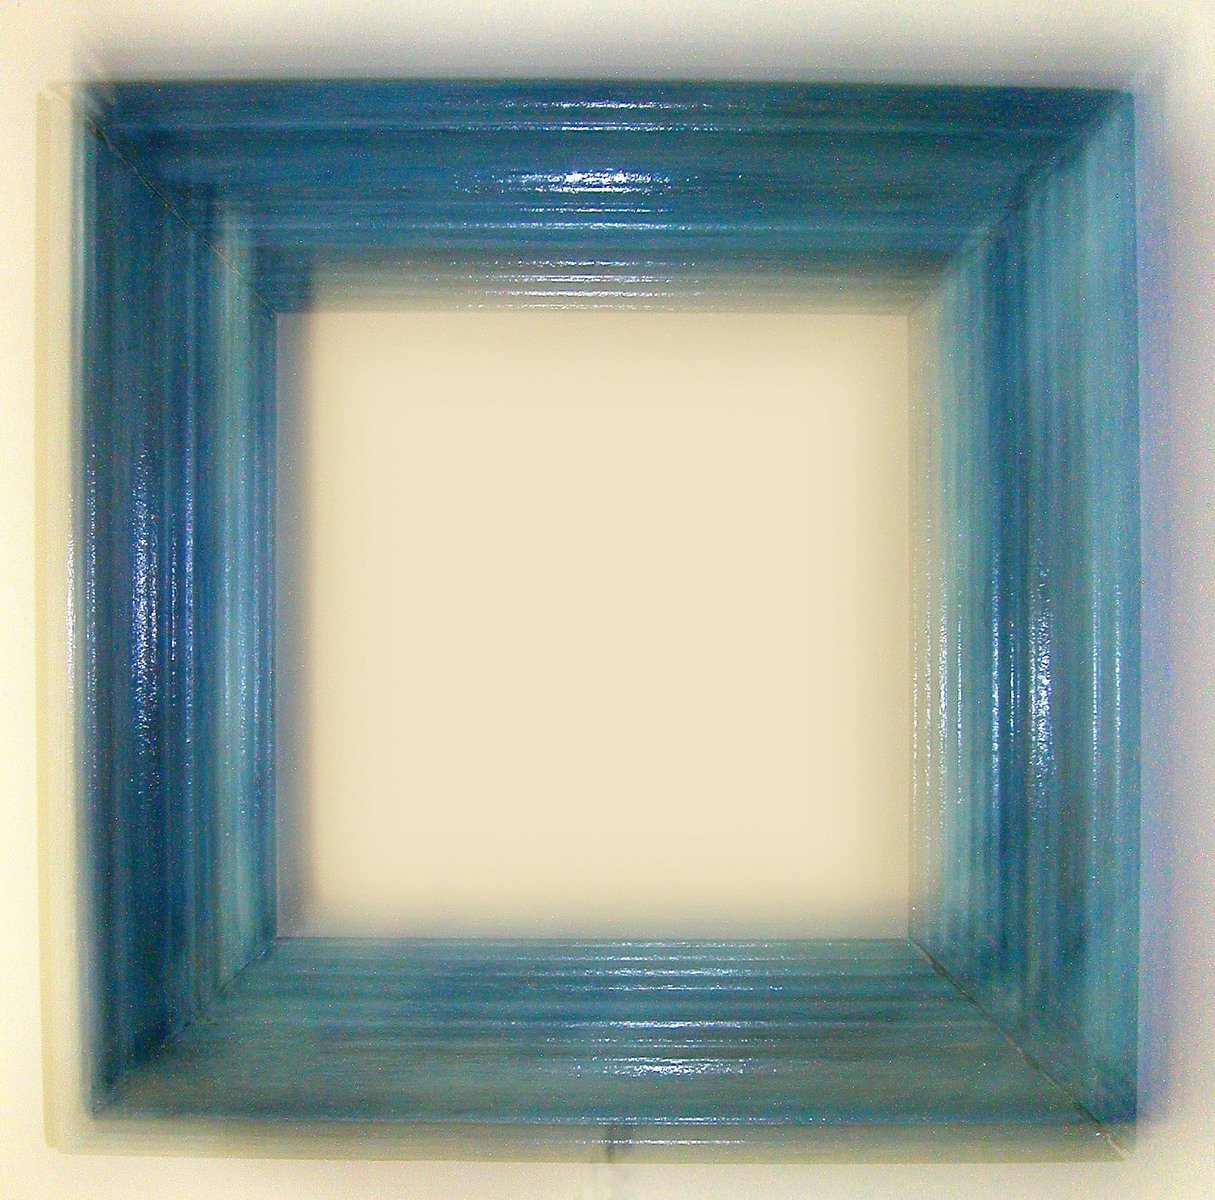 a blue and white po frame is displayed in this image